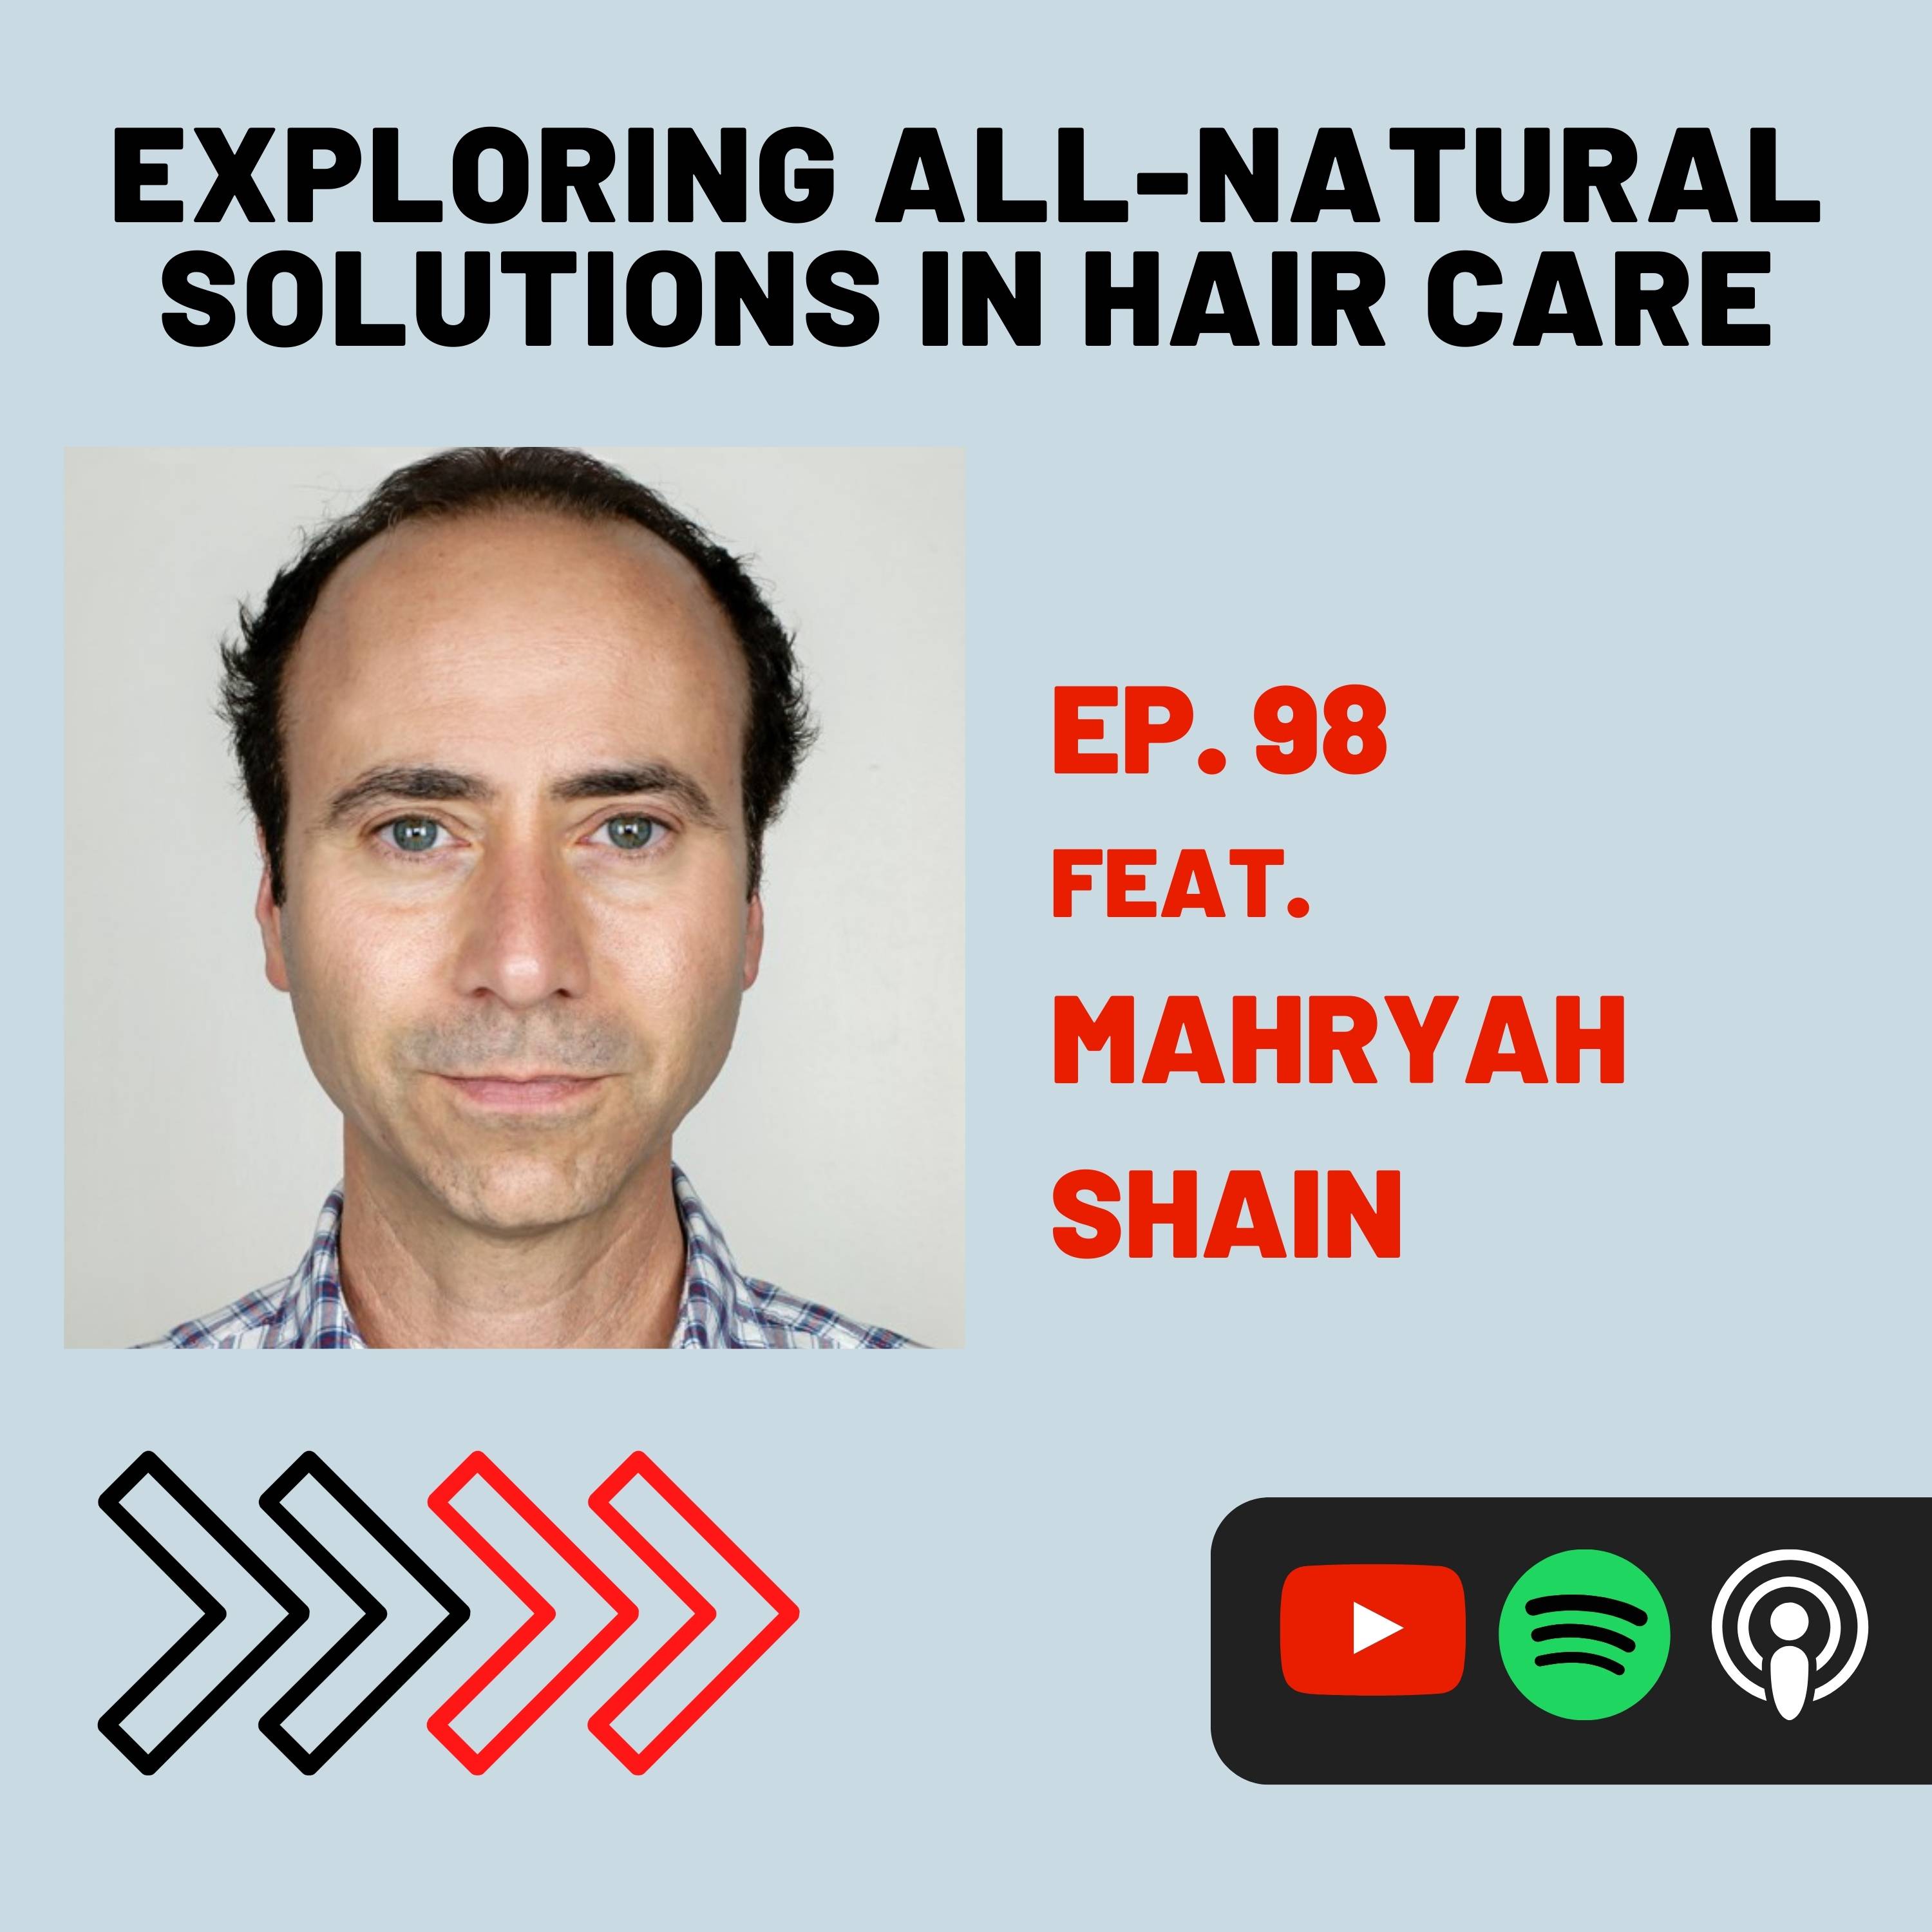 More Hair, No Drugs: Exploring All-Natural Solutions in Hair Care, w/ Mahryah Shain